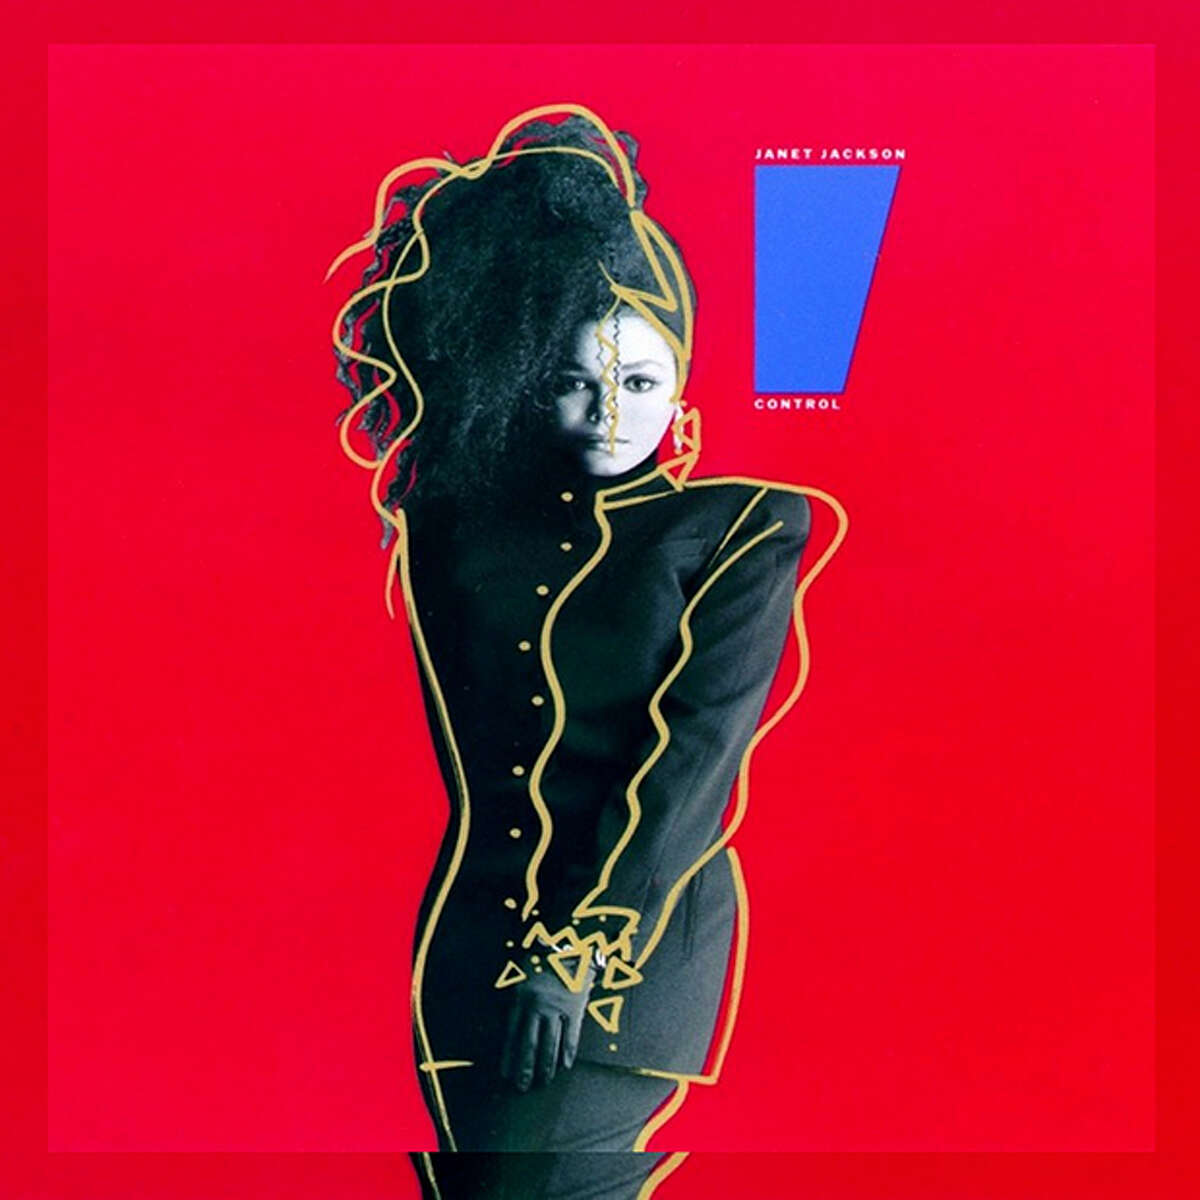 Janet Jacksons Control Album Was Released 32 Years Ago Today